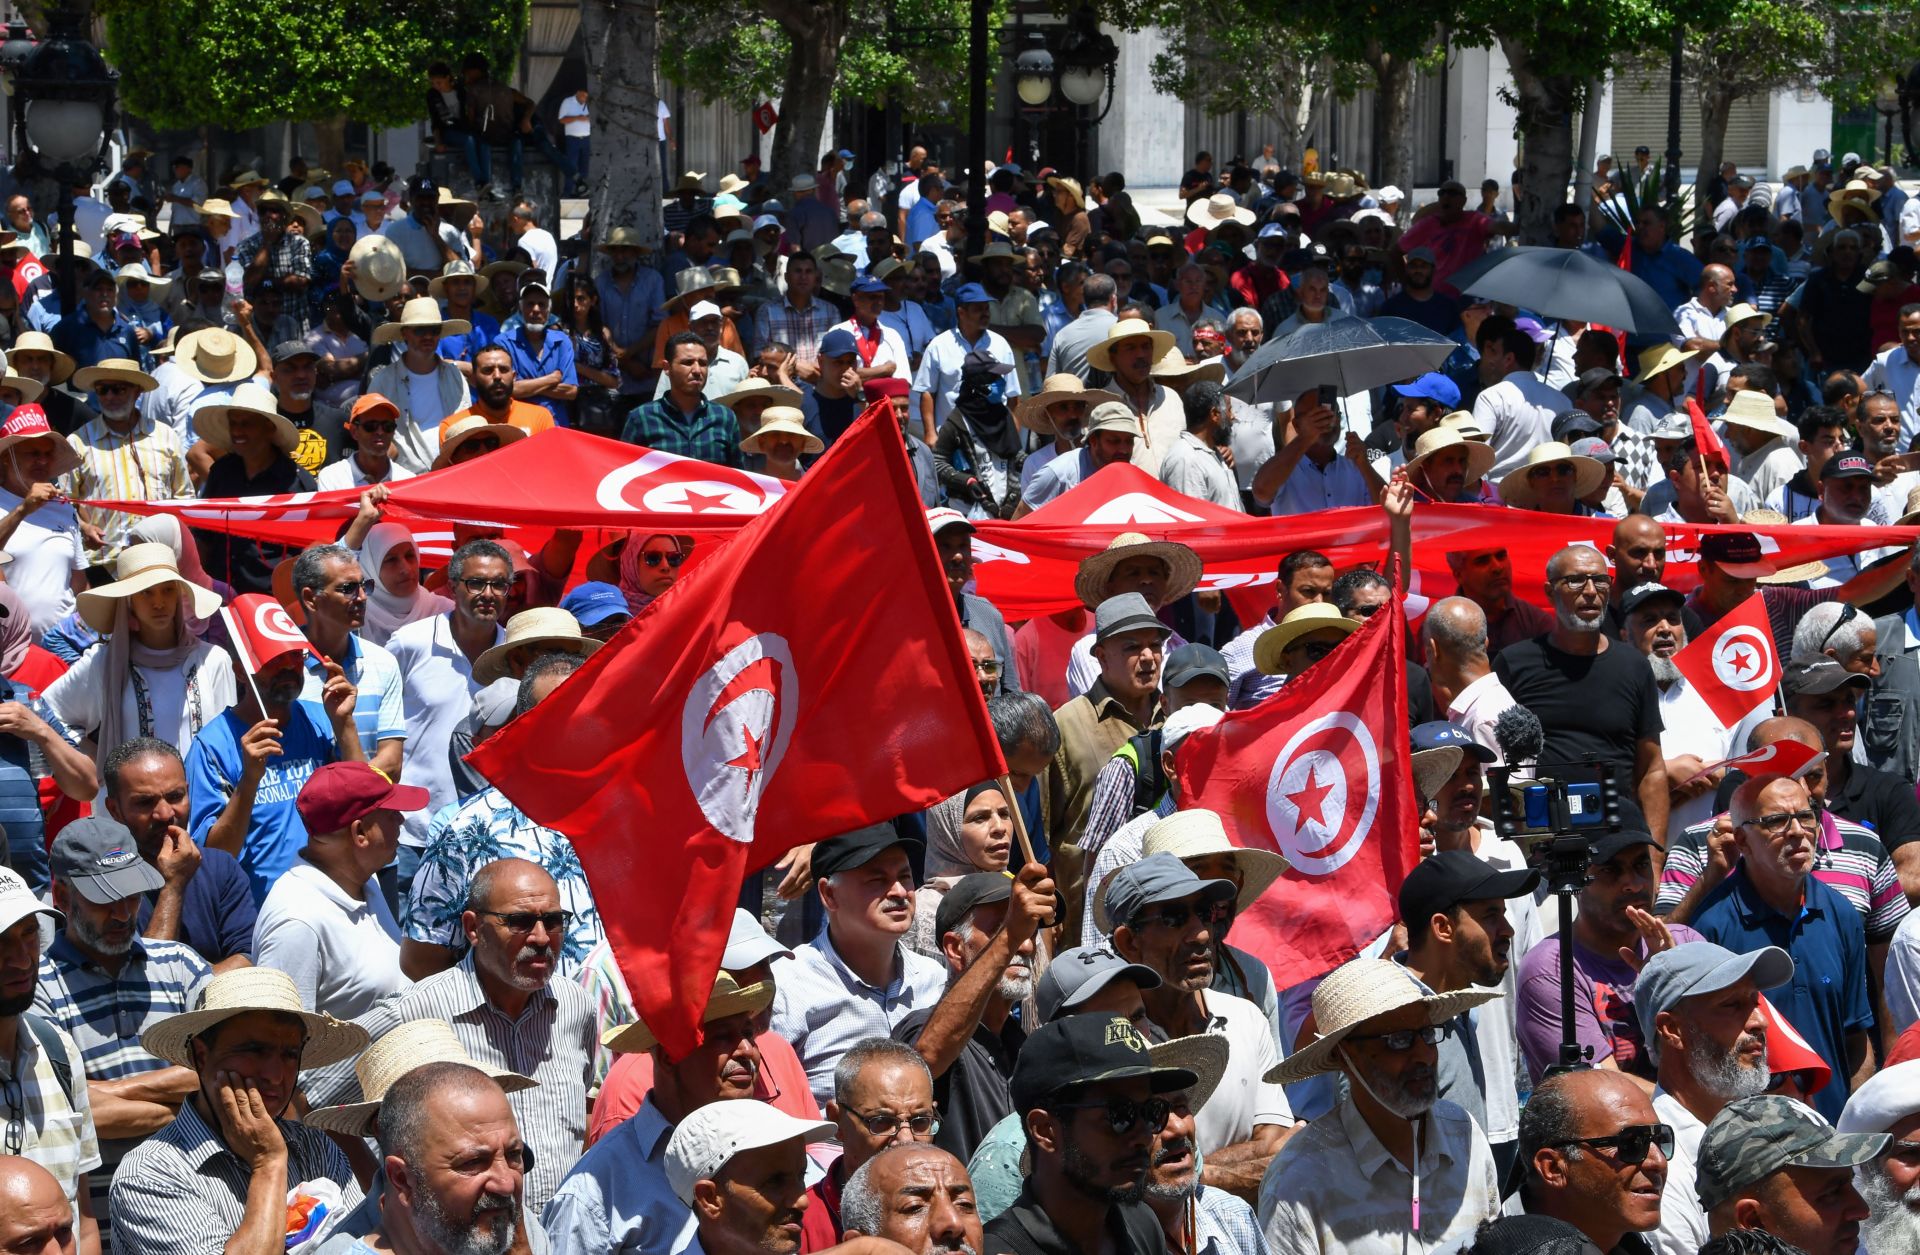 Demonstrators in Tunis, Tunisia, lift national flags during a protest on June 19, 2022, against President Kais Saied and the country’s upcoming constitutional referendum. 